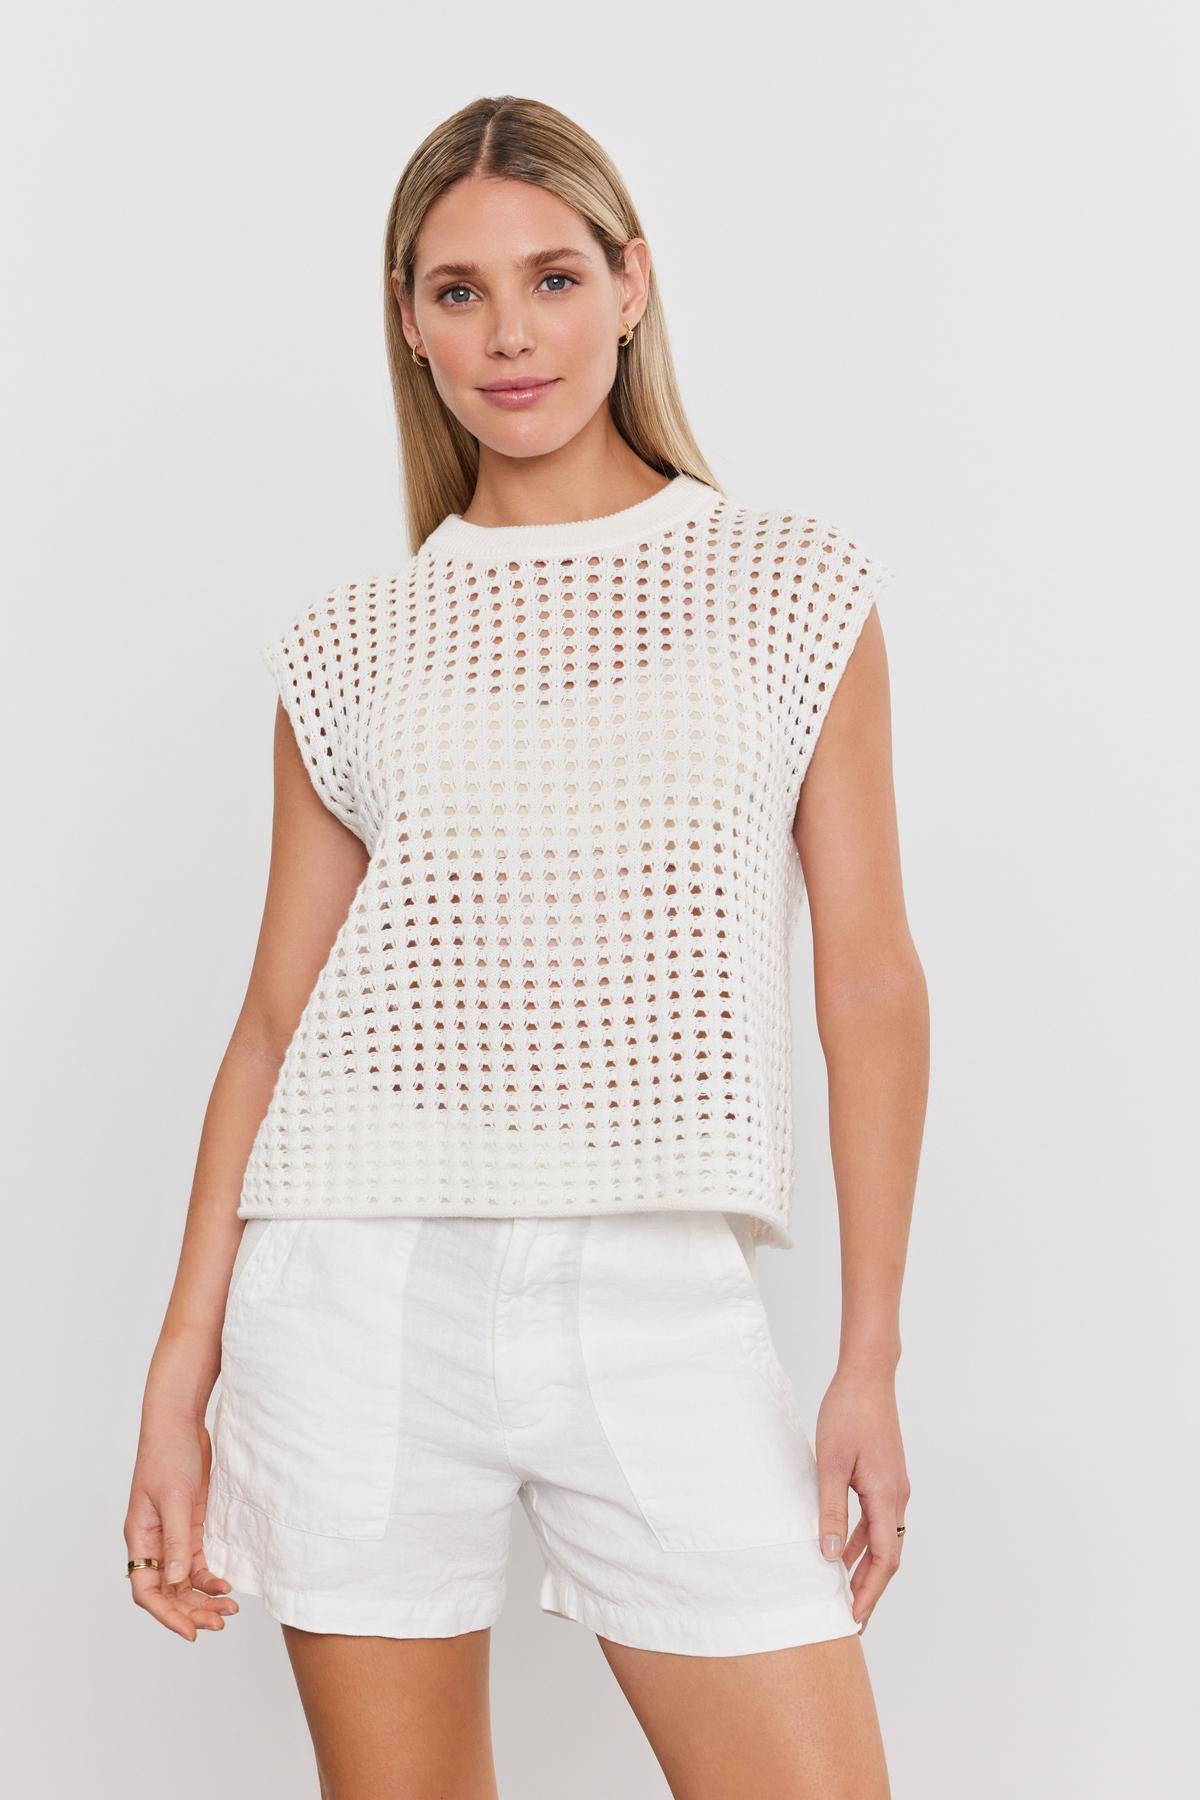   A woman with long blonde hair, wearing the MAISON SWEATER by Velvet by Graham & Spencer and white shorts, stands against a plain white background, showcasing her chic cropped silhouette. 